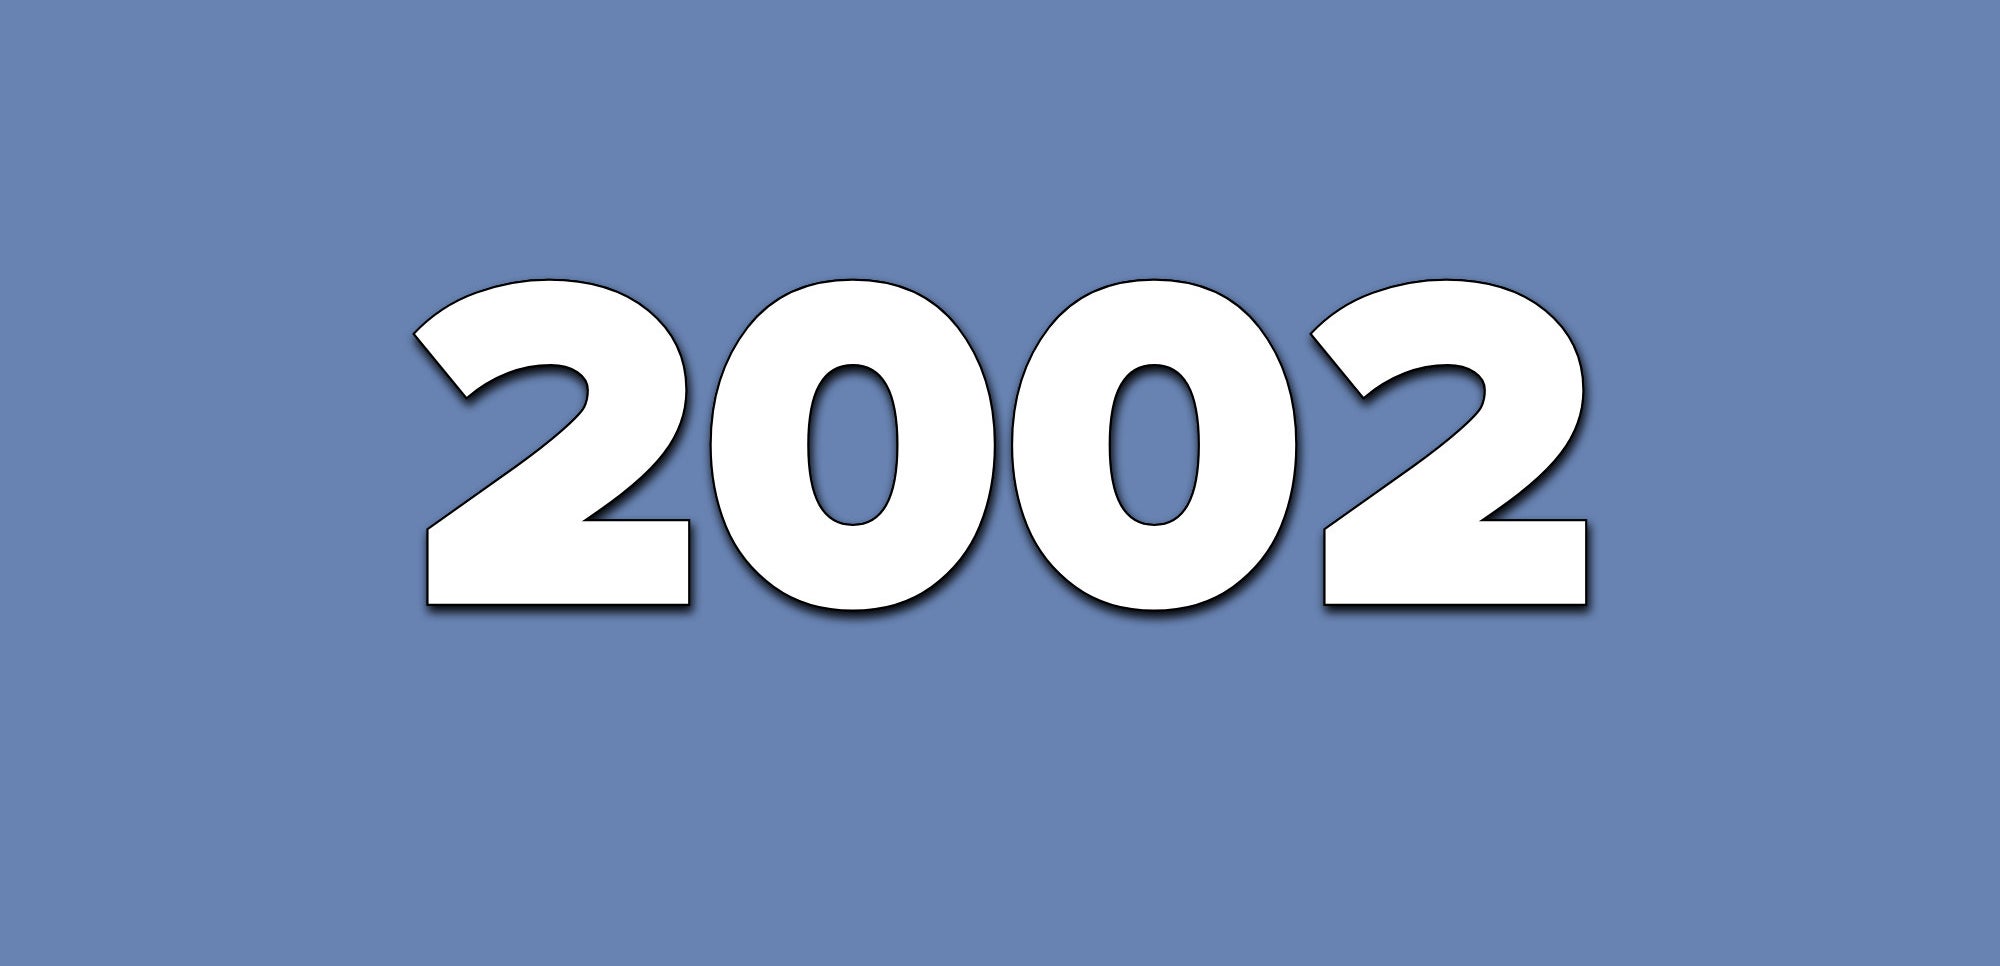 A blue background with text that says 2002